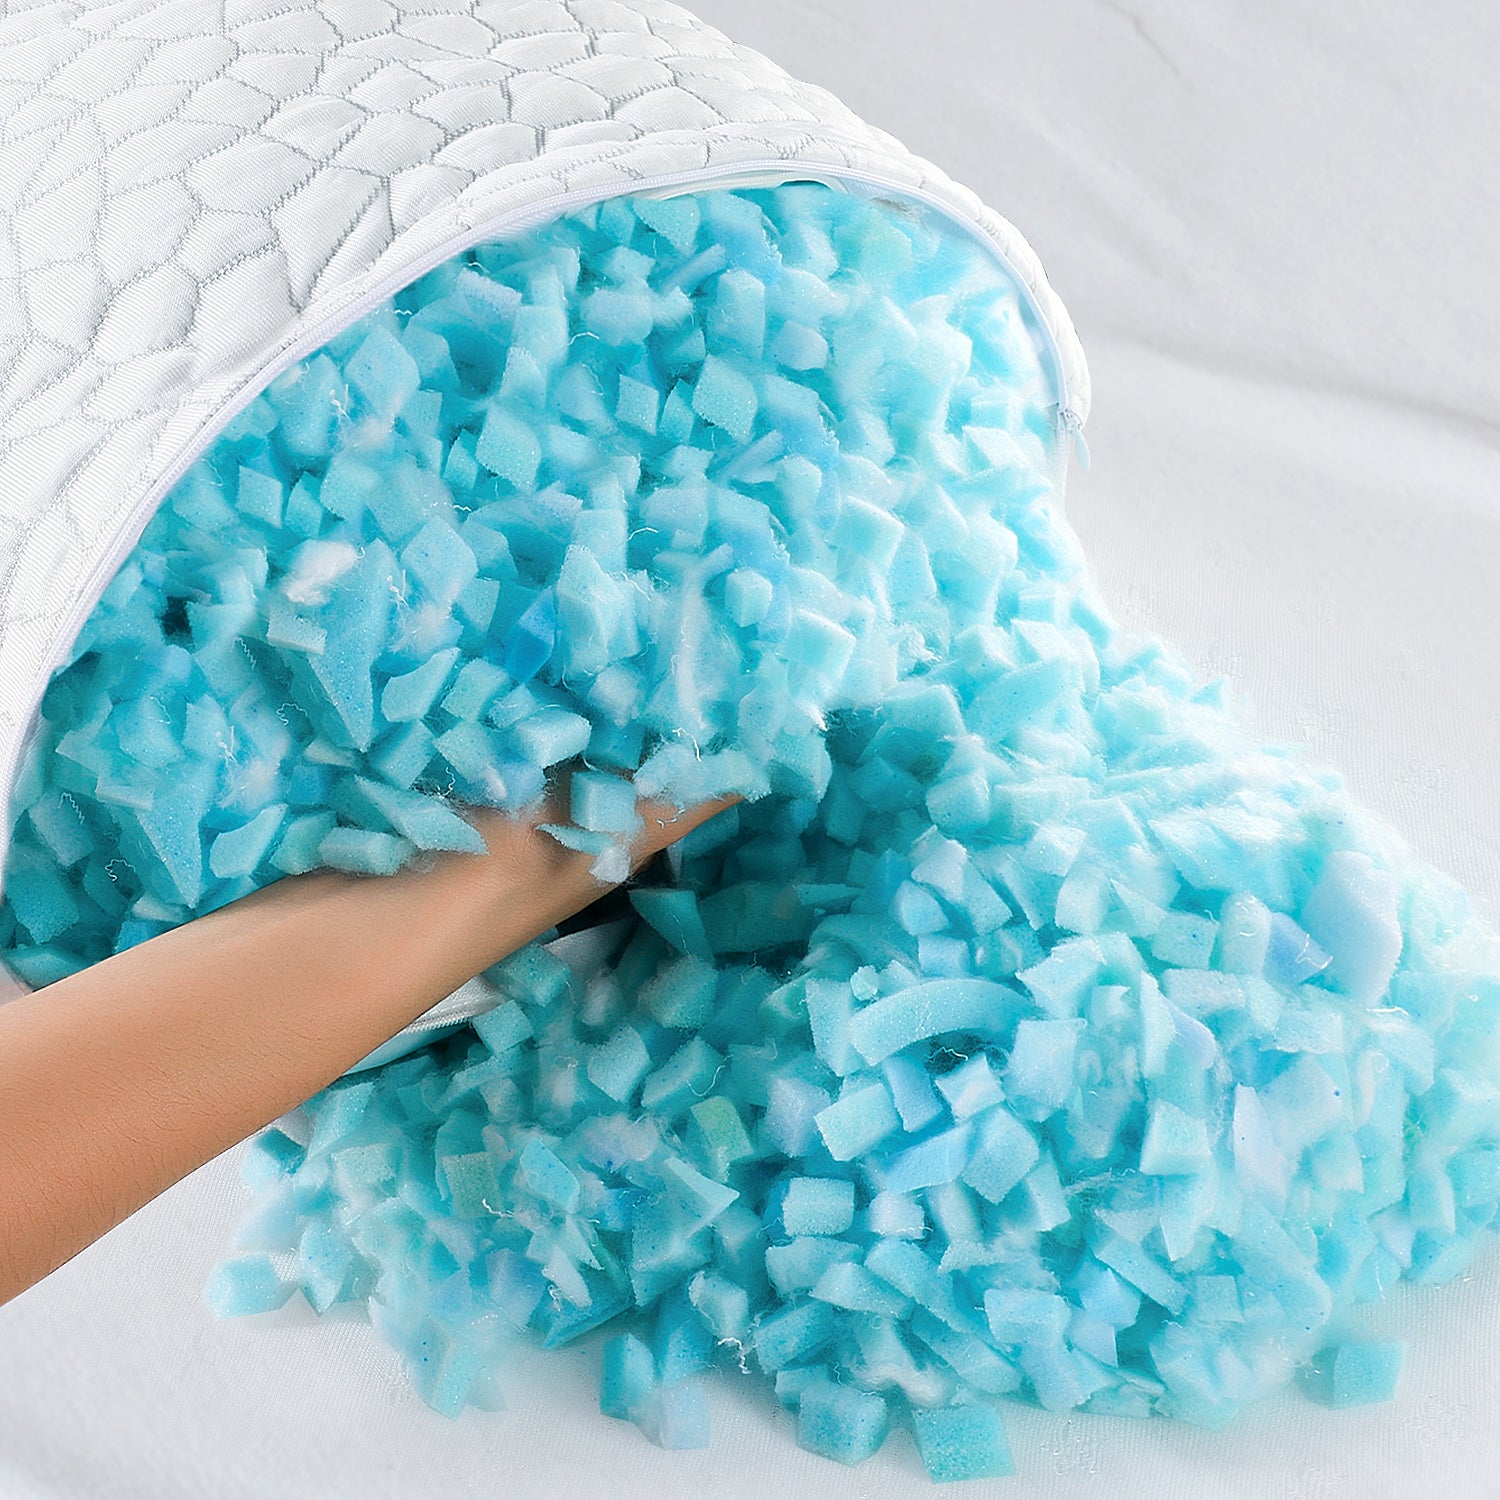 QUTOOL Cooling Bed Pillow for Hot Sleepers Shredded Memory Foam Pillows